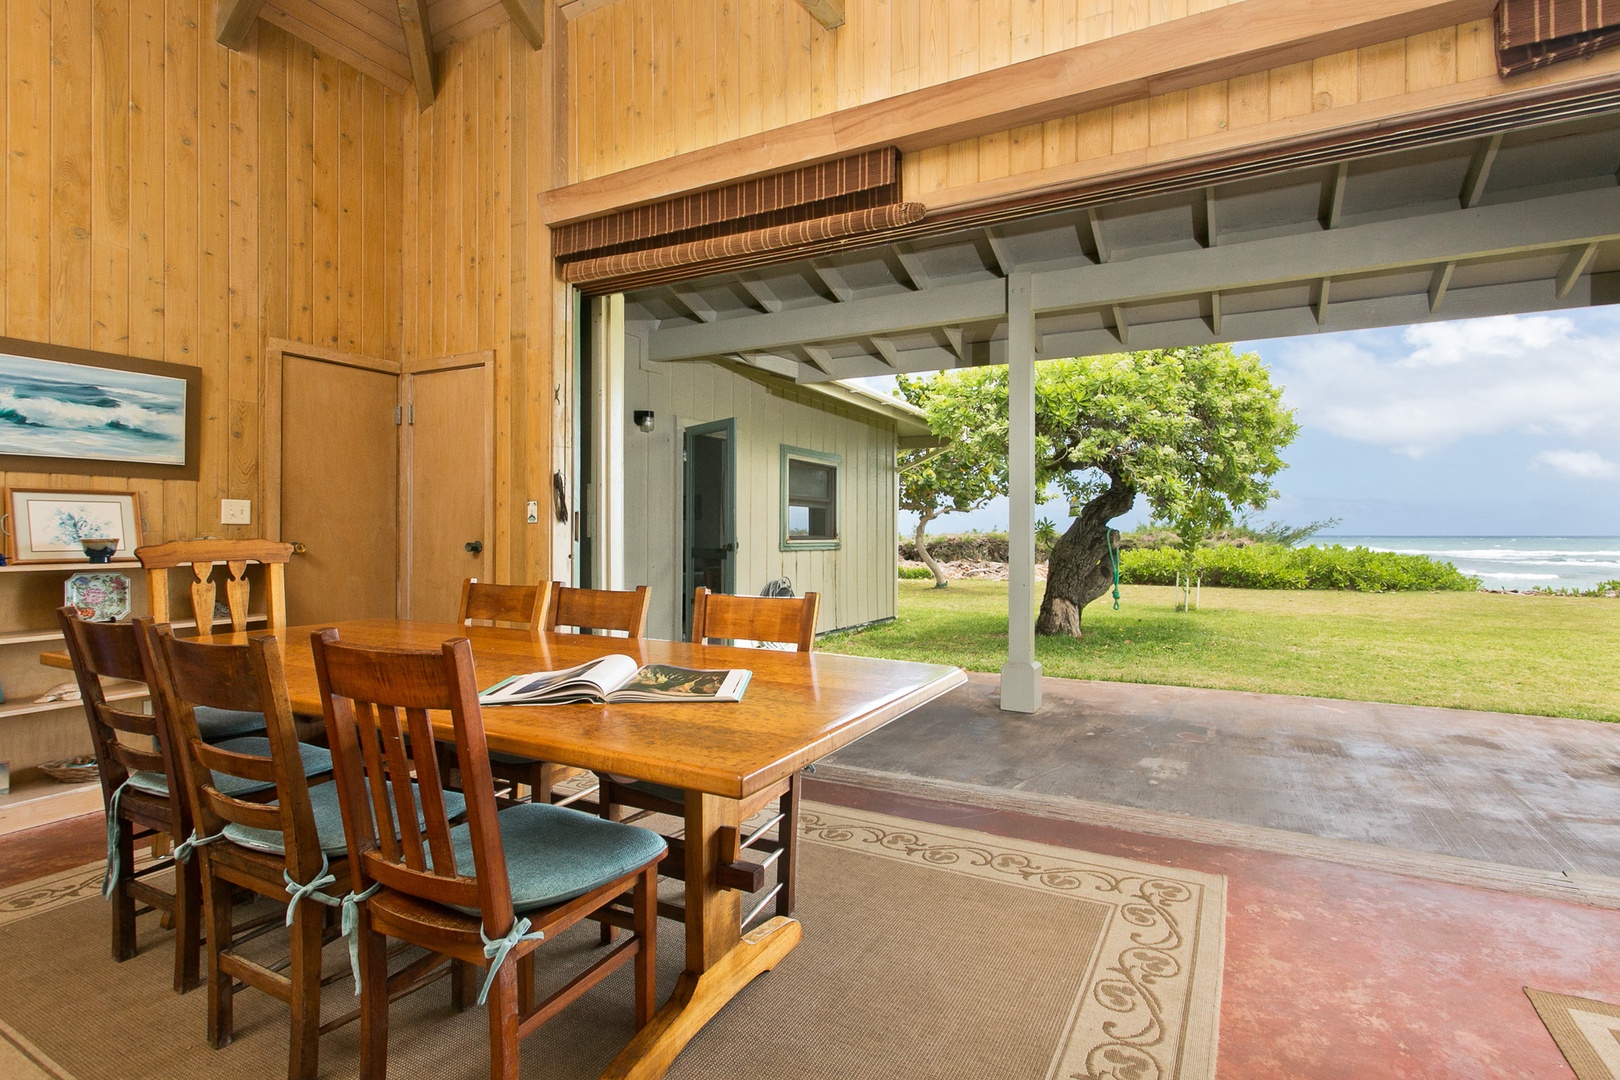 Laie Vacation Rentals, Waipuna Hale - Dining for six.